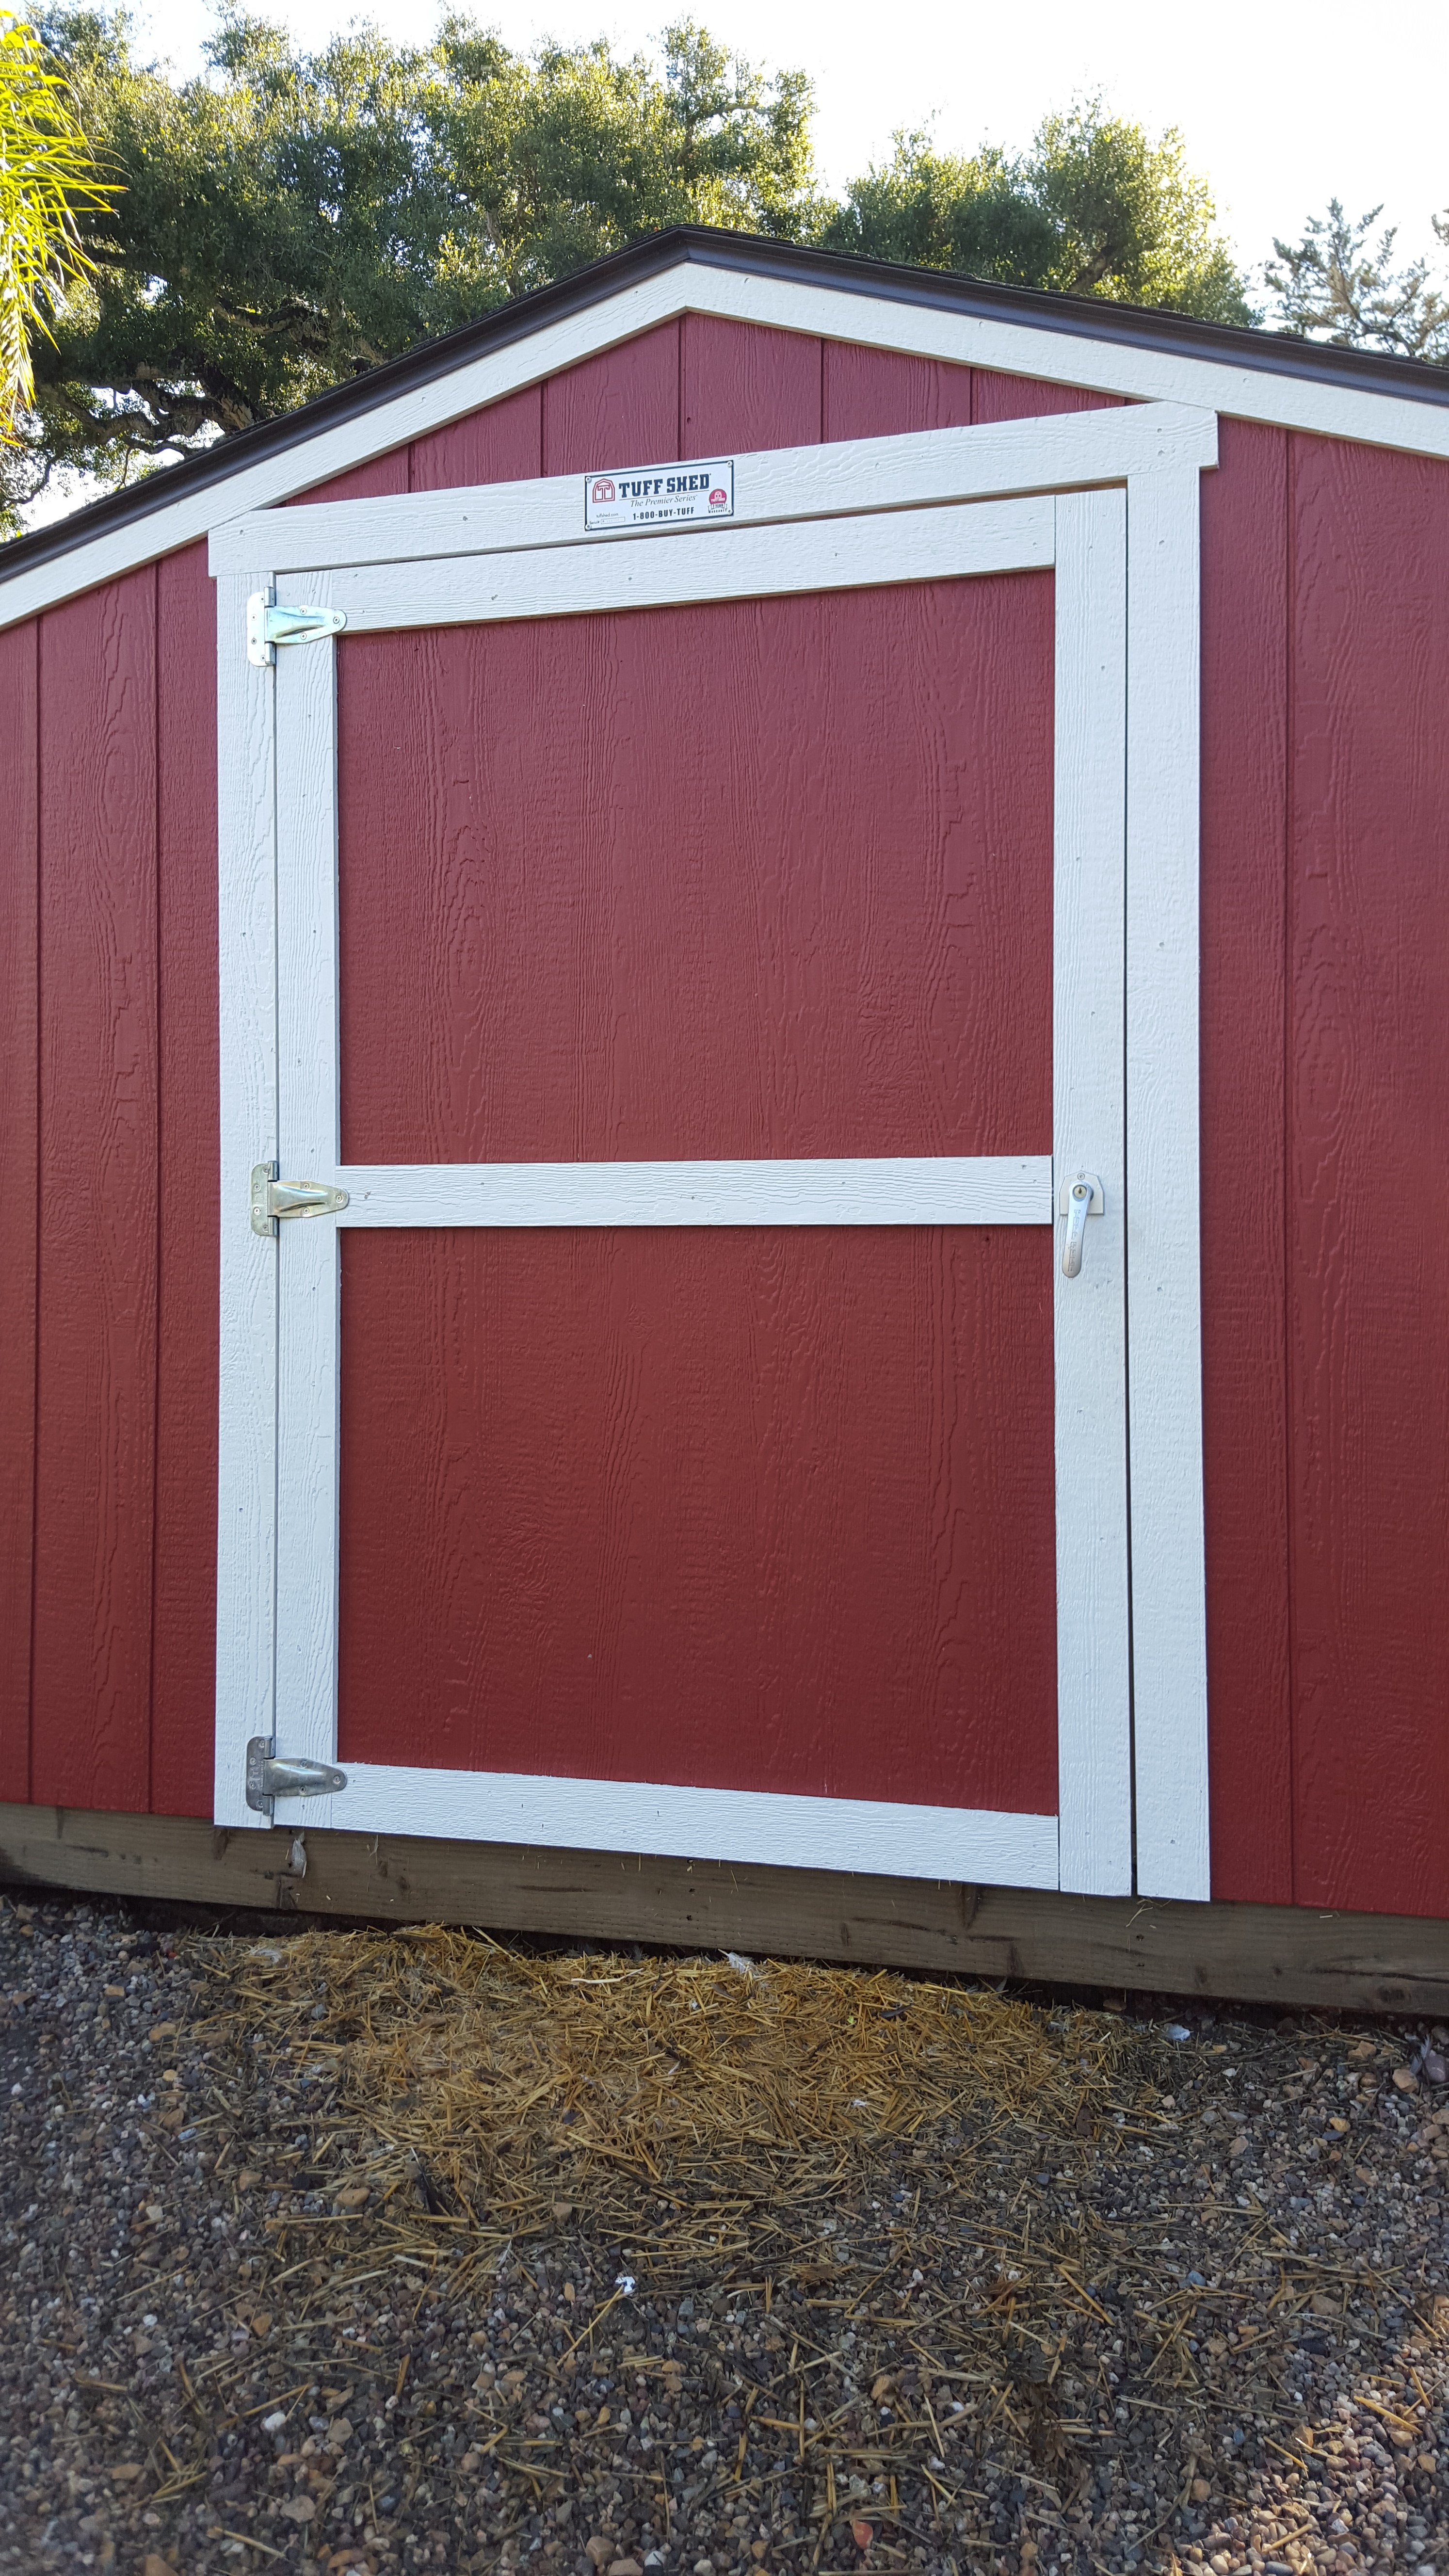 When One Tuff Shed Building Isn't Enough - Tuff Shed